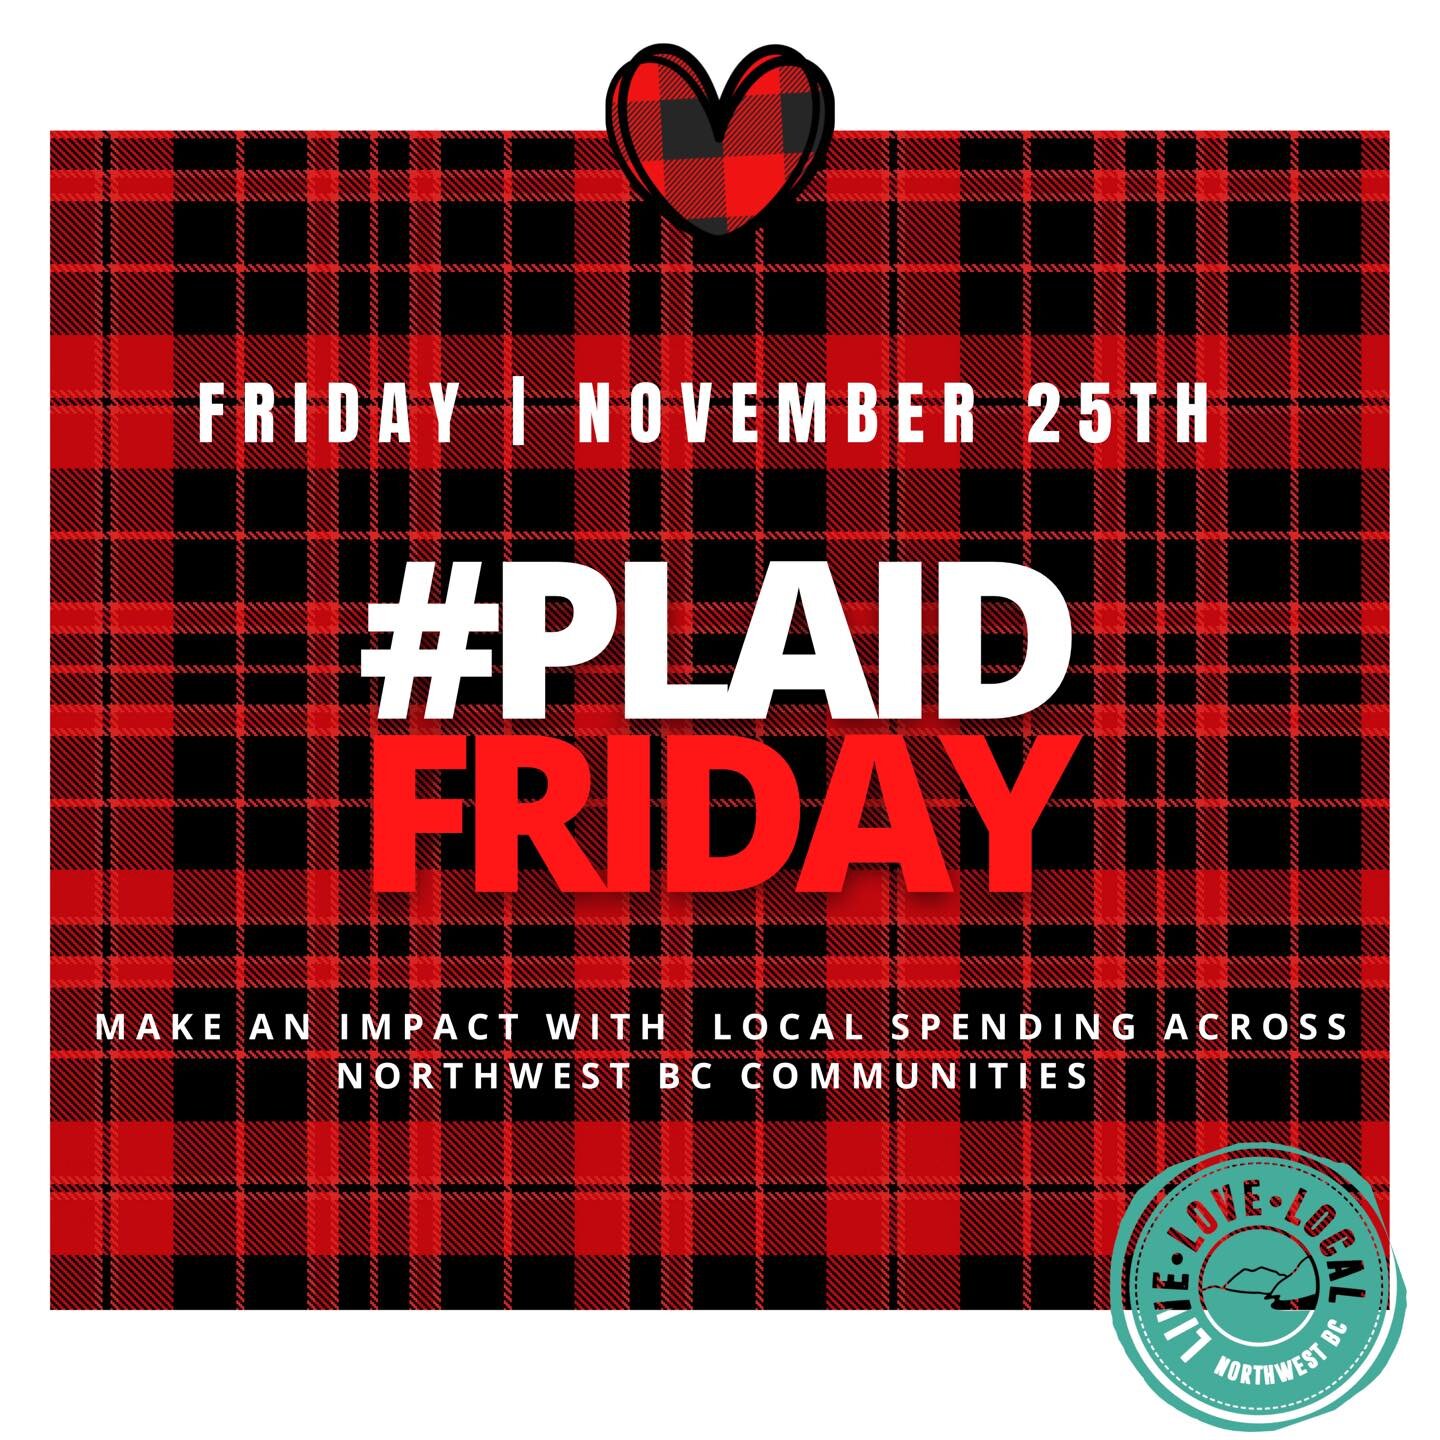 Have you heard of #plaidFriday! It&rsquo;s a locally minded conscious consumer alternative to &ldquo;Black Friday&rdquo;, taking place on the same day. It&rsquo;s about supporting our many locally owned businesses across all sectors in the northern e